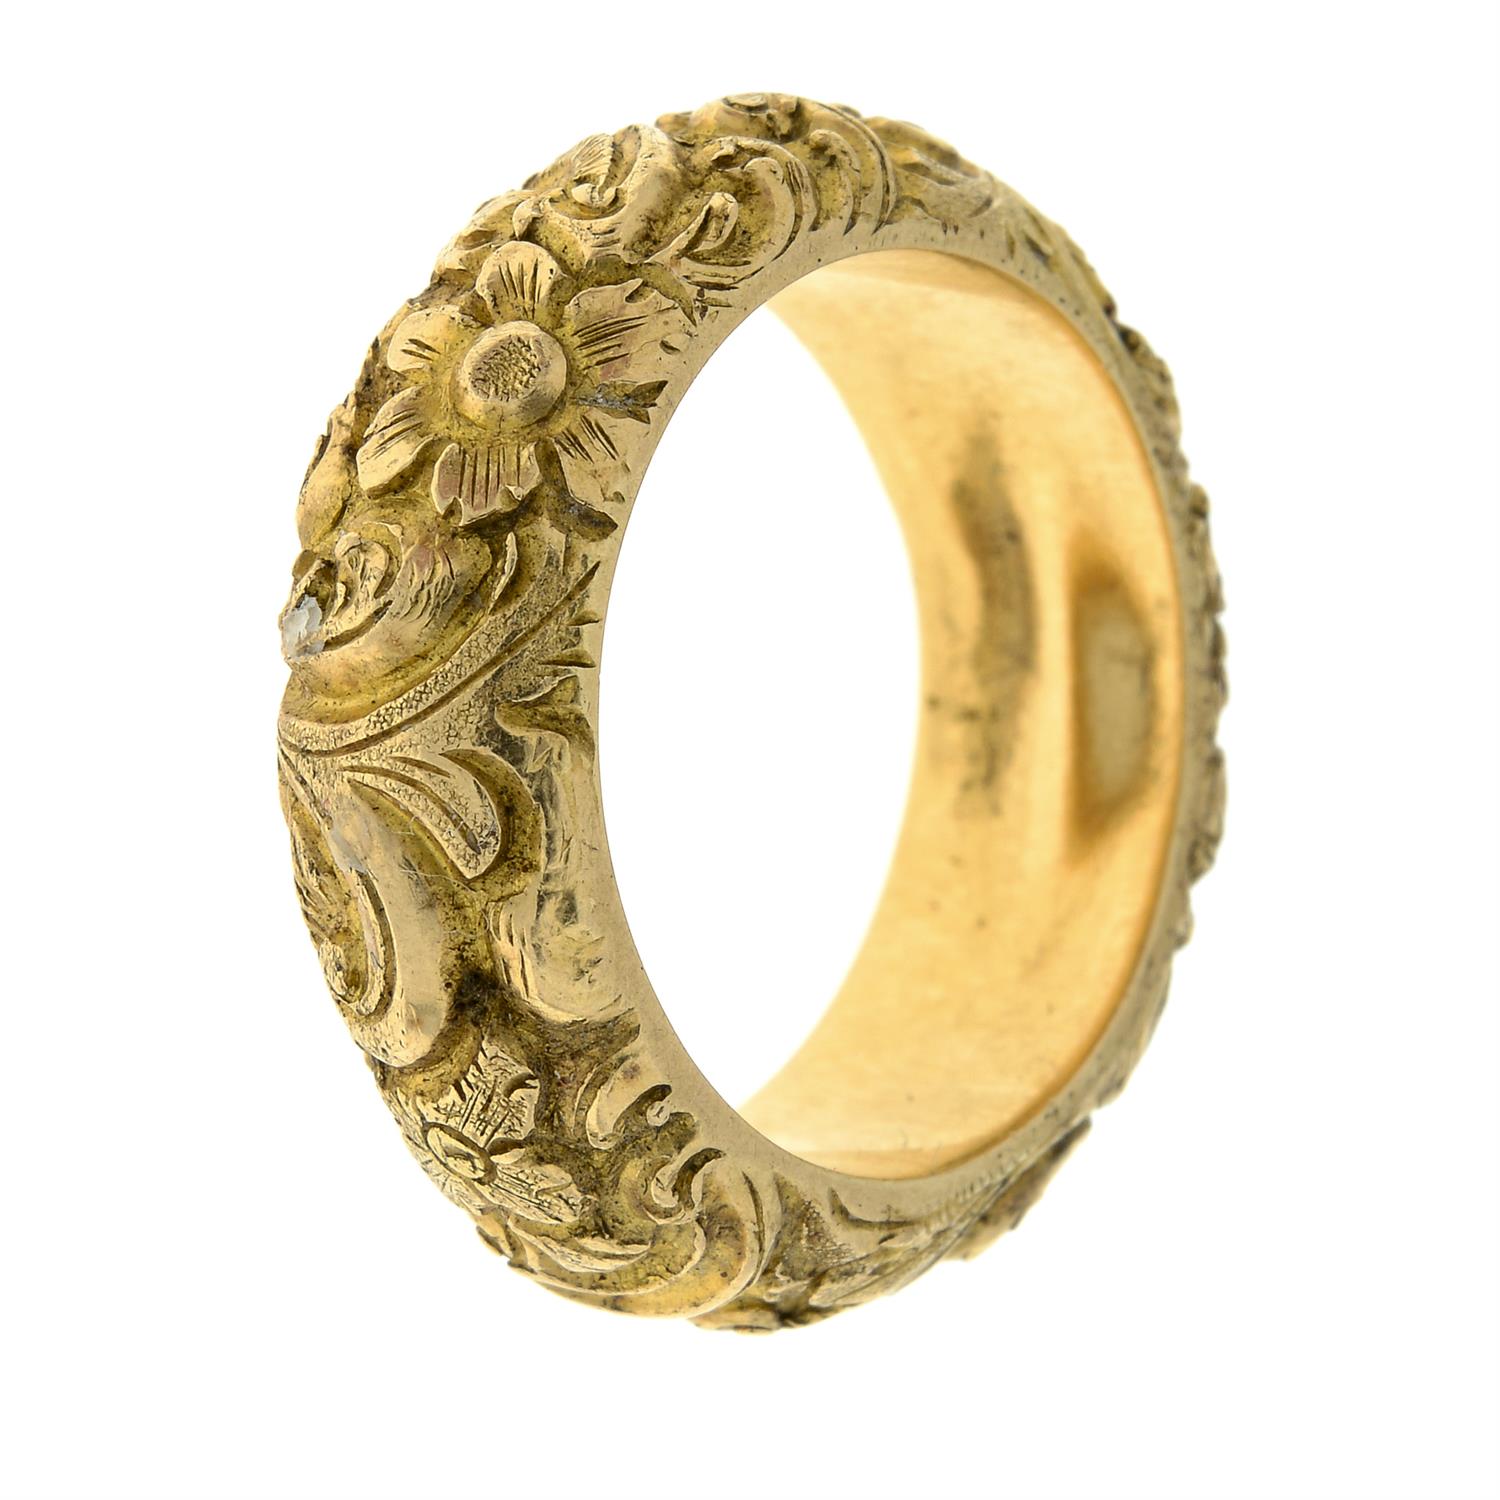 19th century gold floral band ring - Image 3 of 4